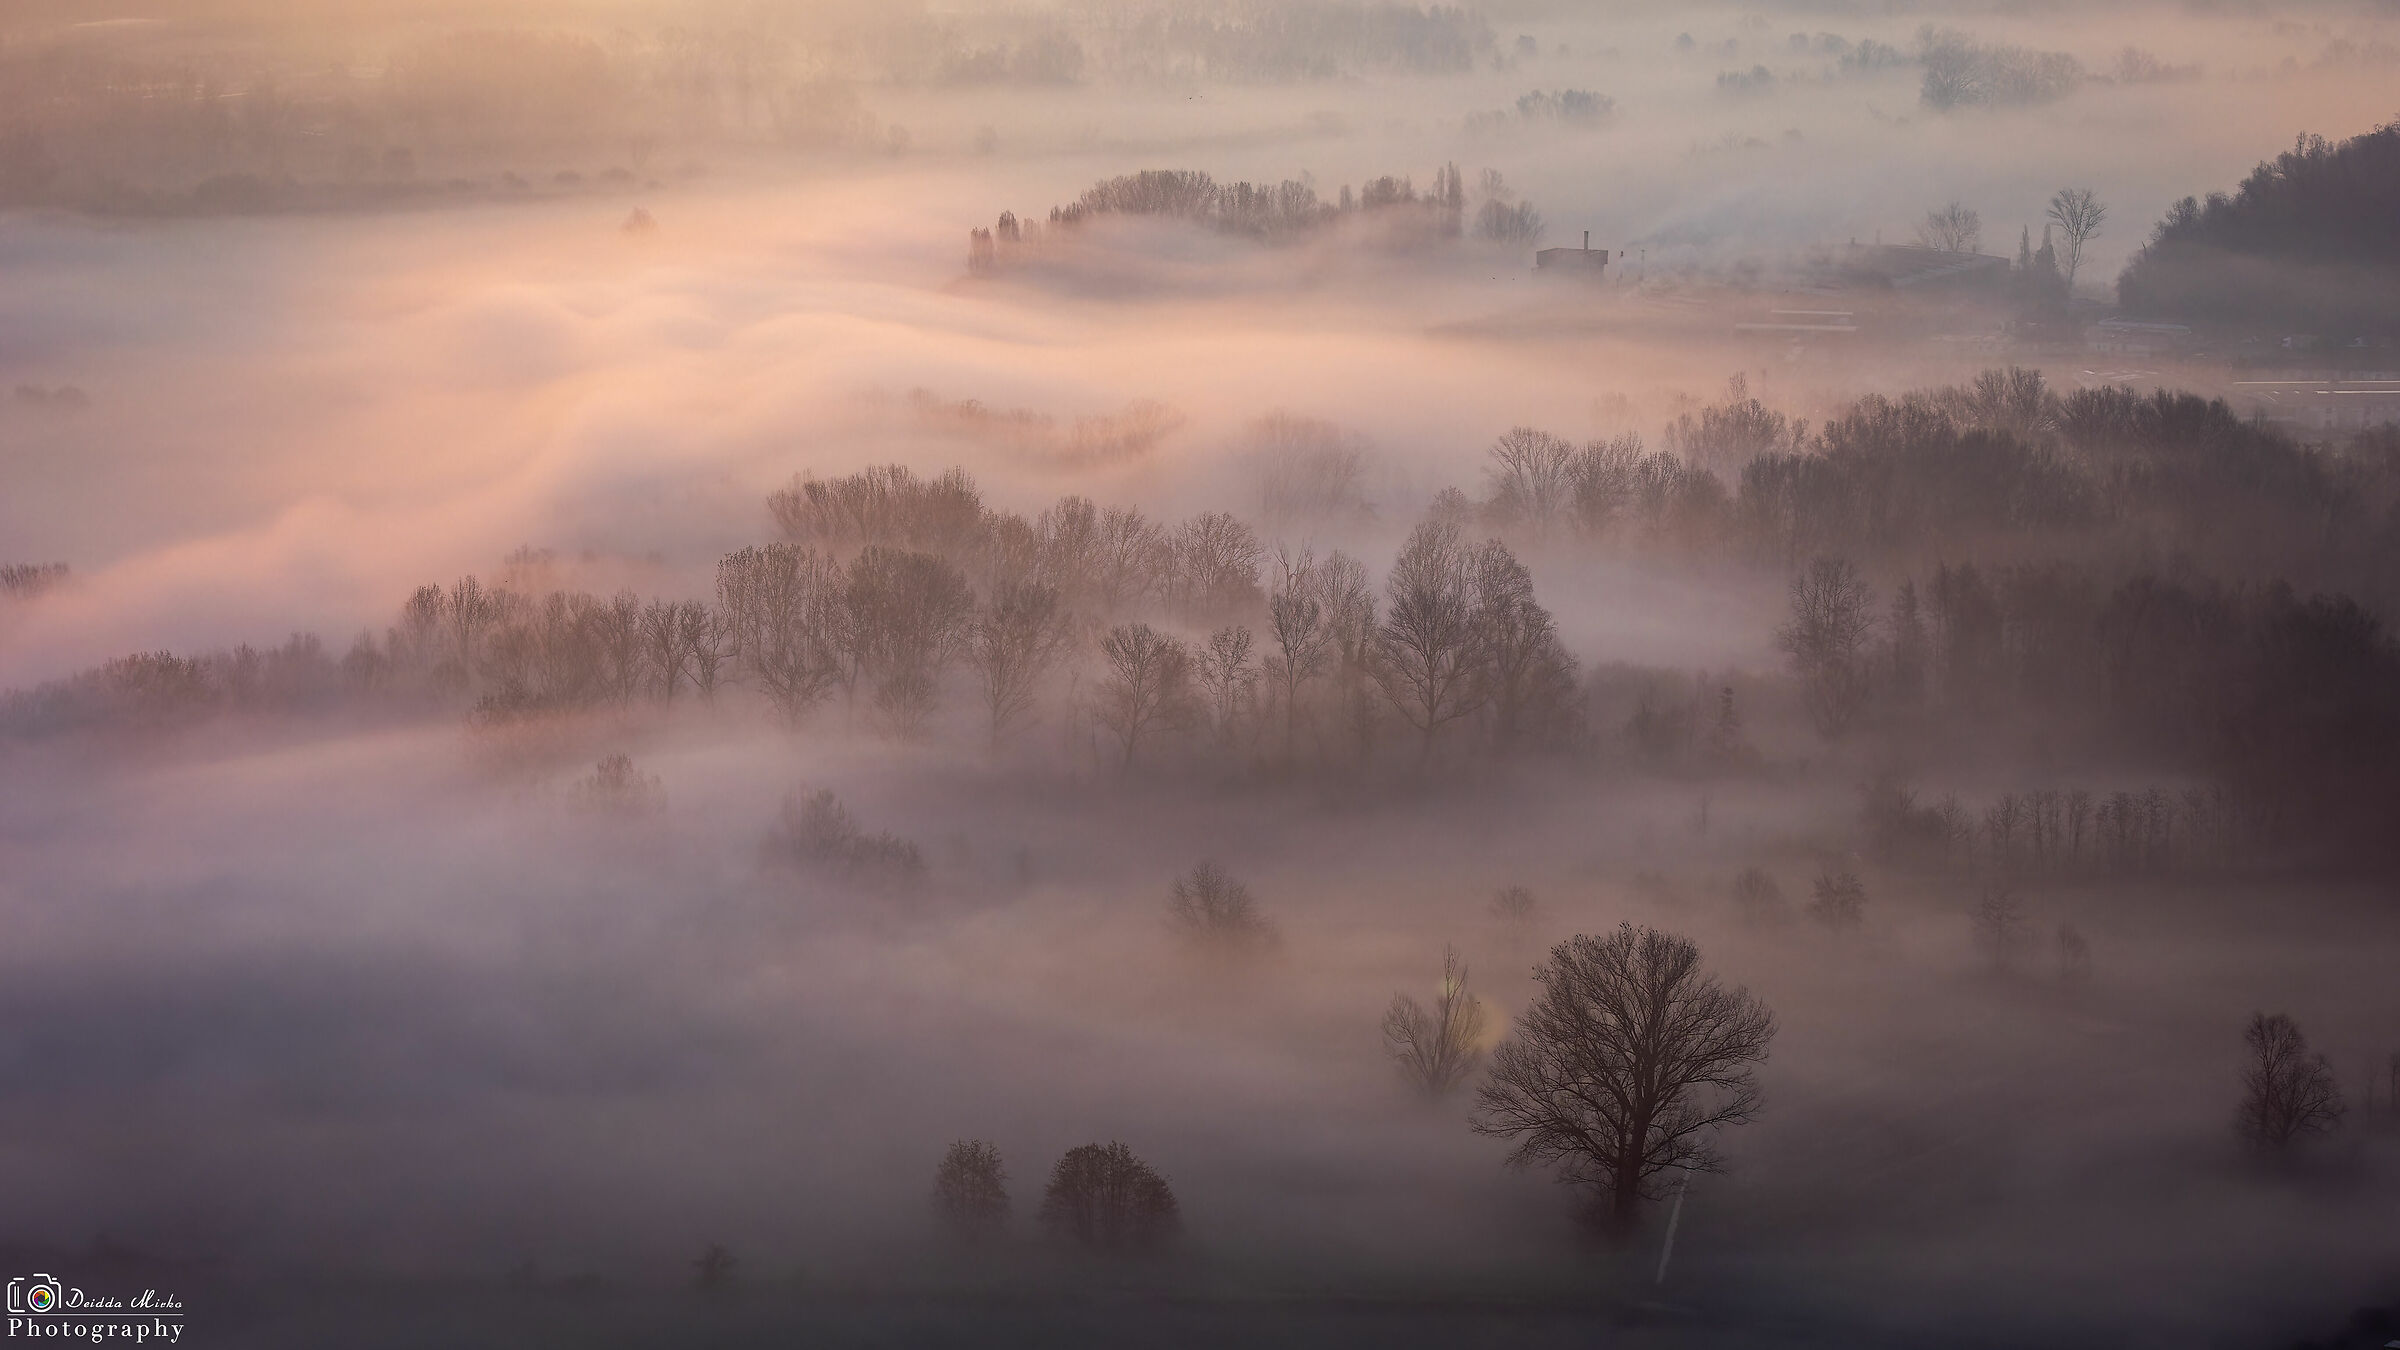 The colors of dawn in the fog...